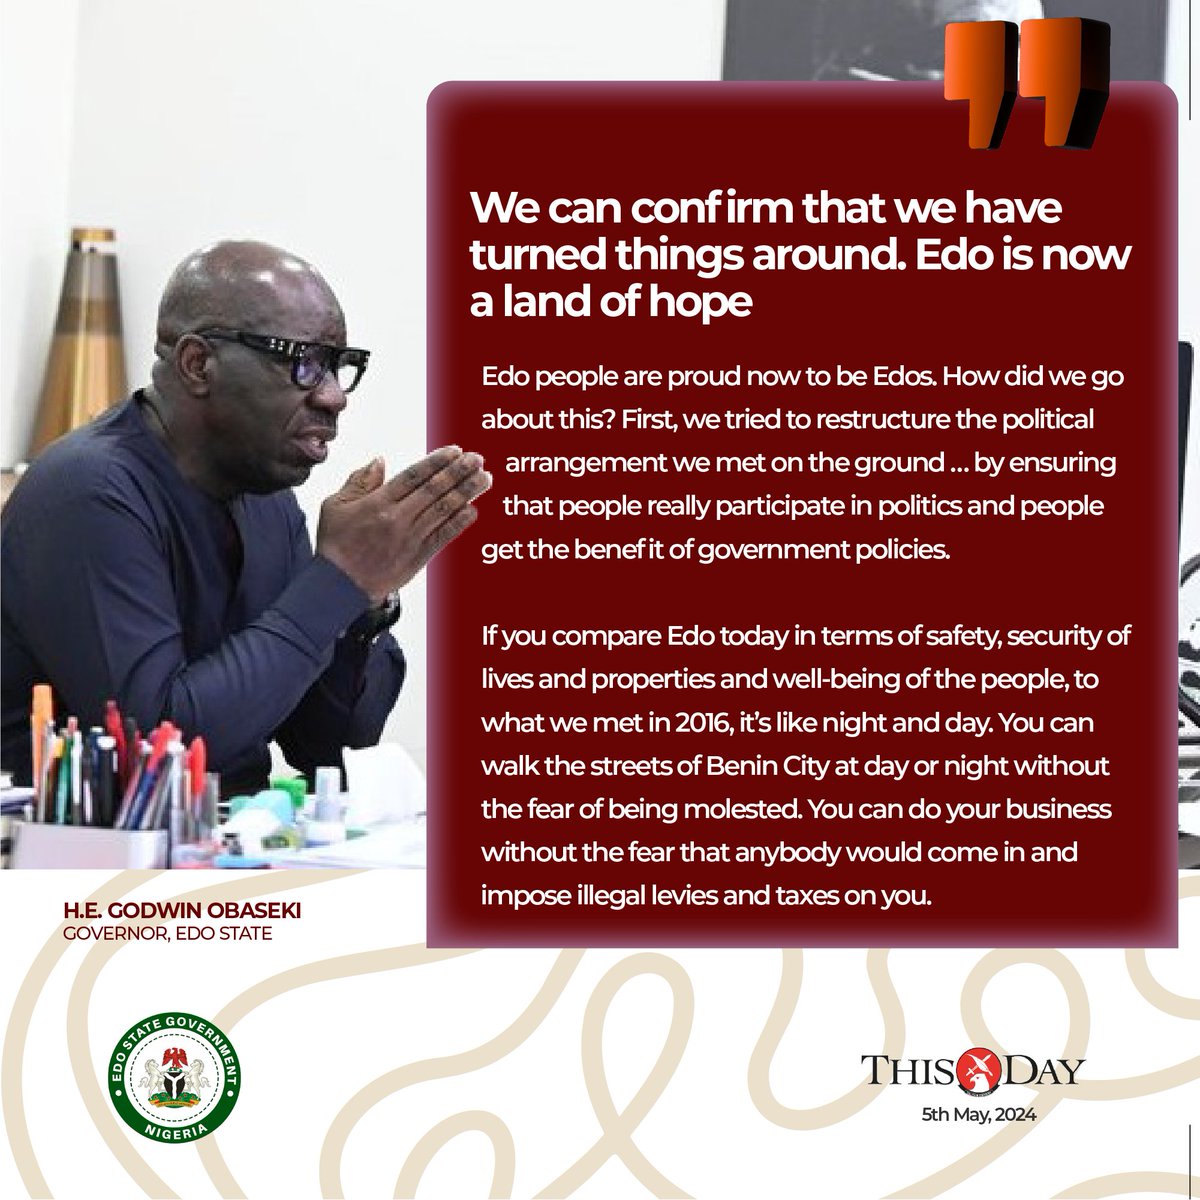 Recently, I had an interview with THISDAY Newspaper where I delved into a range of issues - Edo renaissance, my political battles, my administration’s goal to finish on a high note, sustainability of our reforms, among others. I am sharing some excerpts from the interview here.